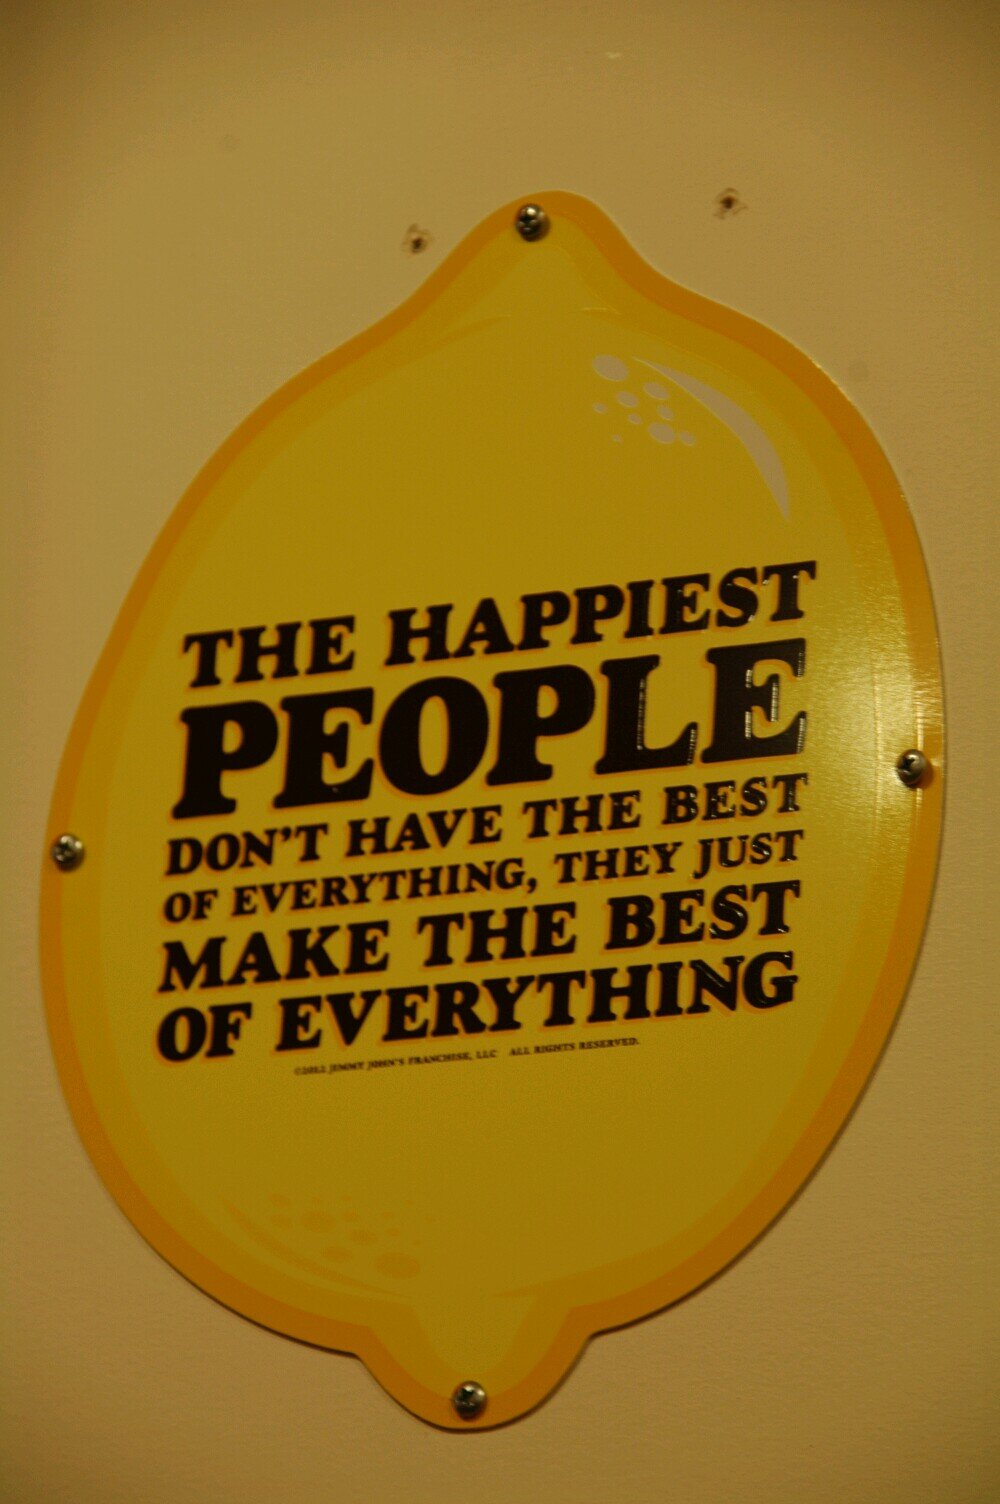 The happiest people don't have the best of everything, they just make the best of everything.